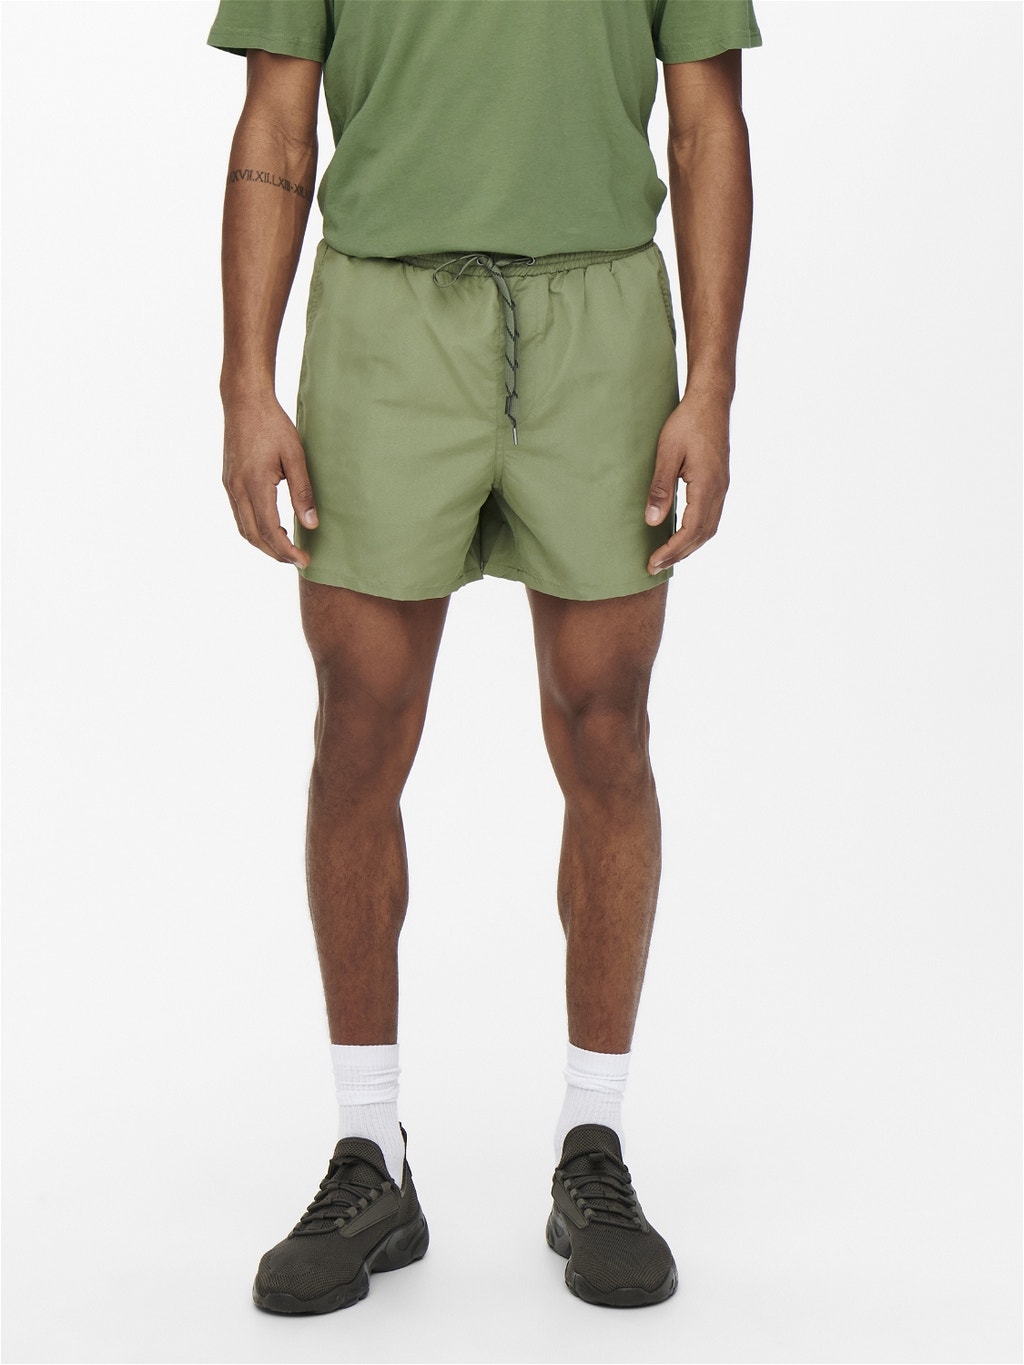 Shorts Corte regular | Verde oscuro | ONLY & SONS®